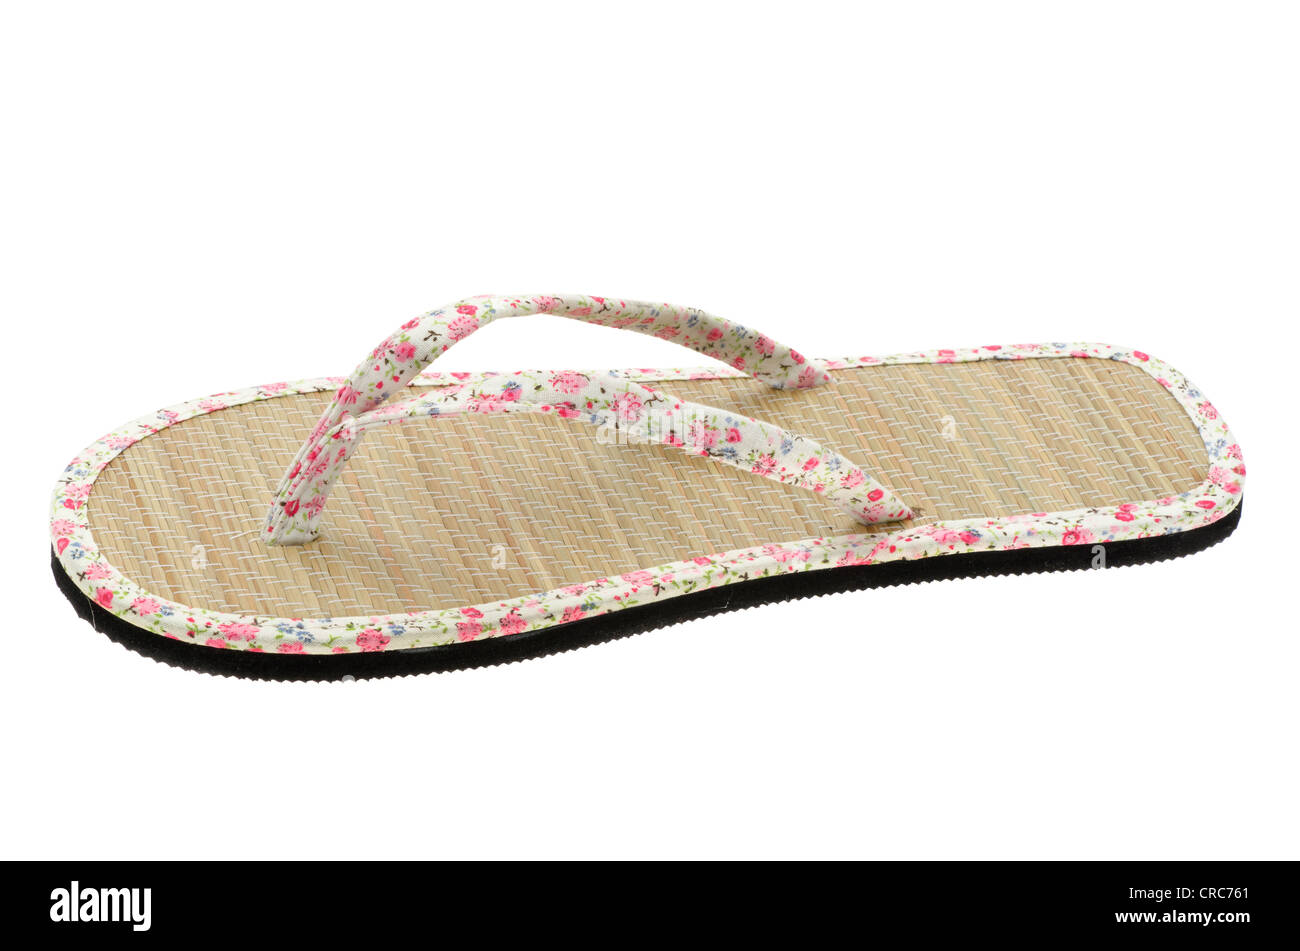 Ladies flip-flop summer sandal - image taken in the studio with a white background Stock Photo